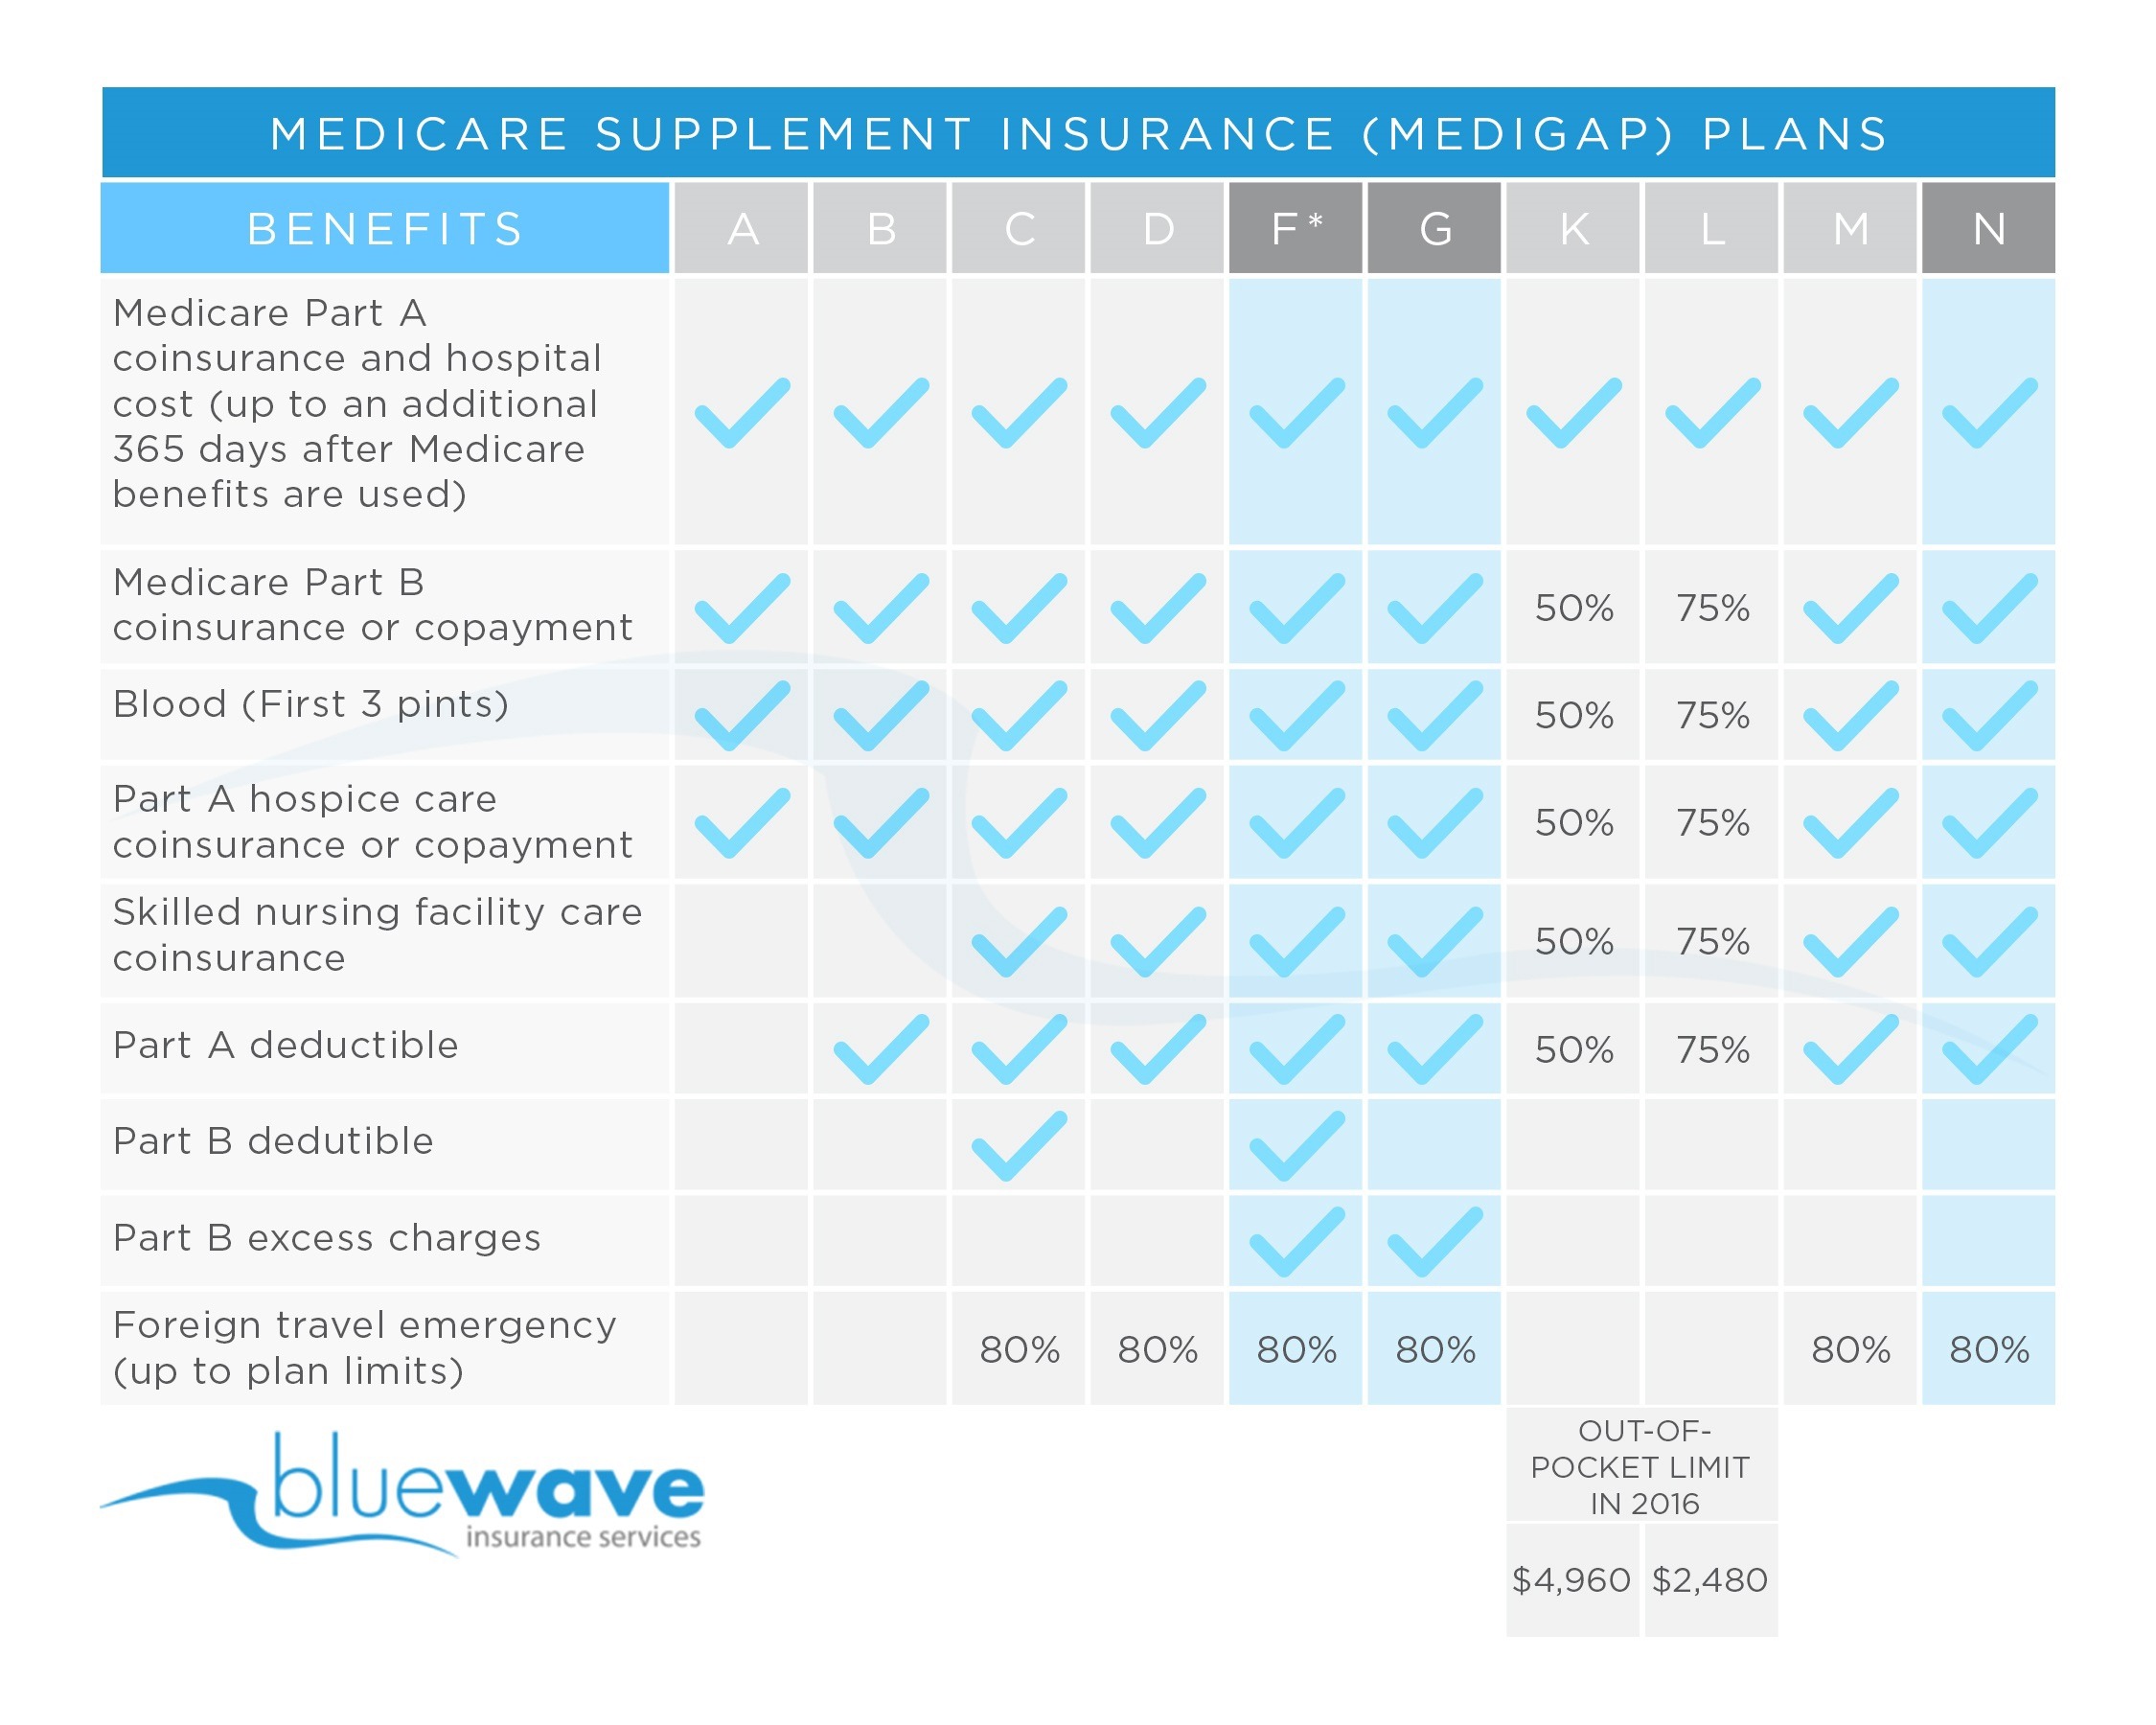 Bankers Life Medicare Supplement Insurance Review